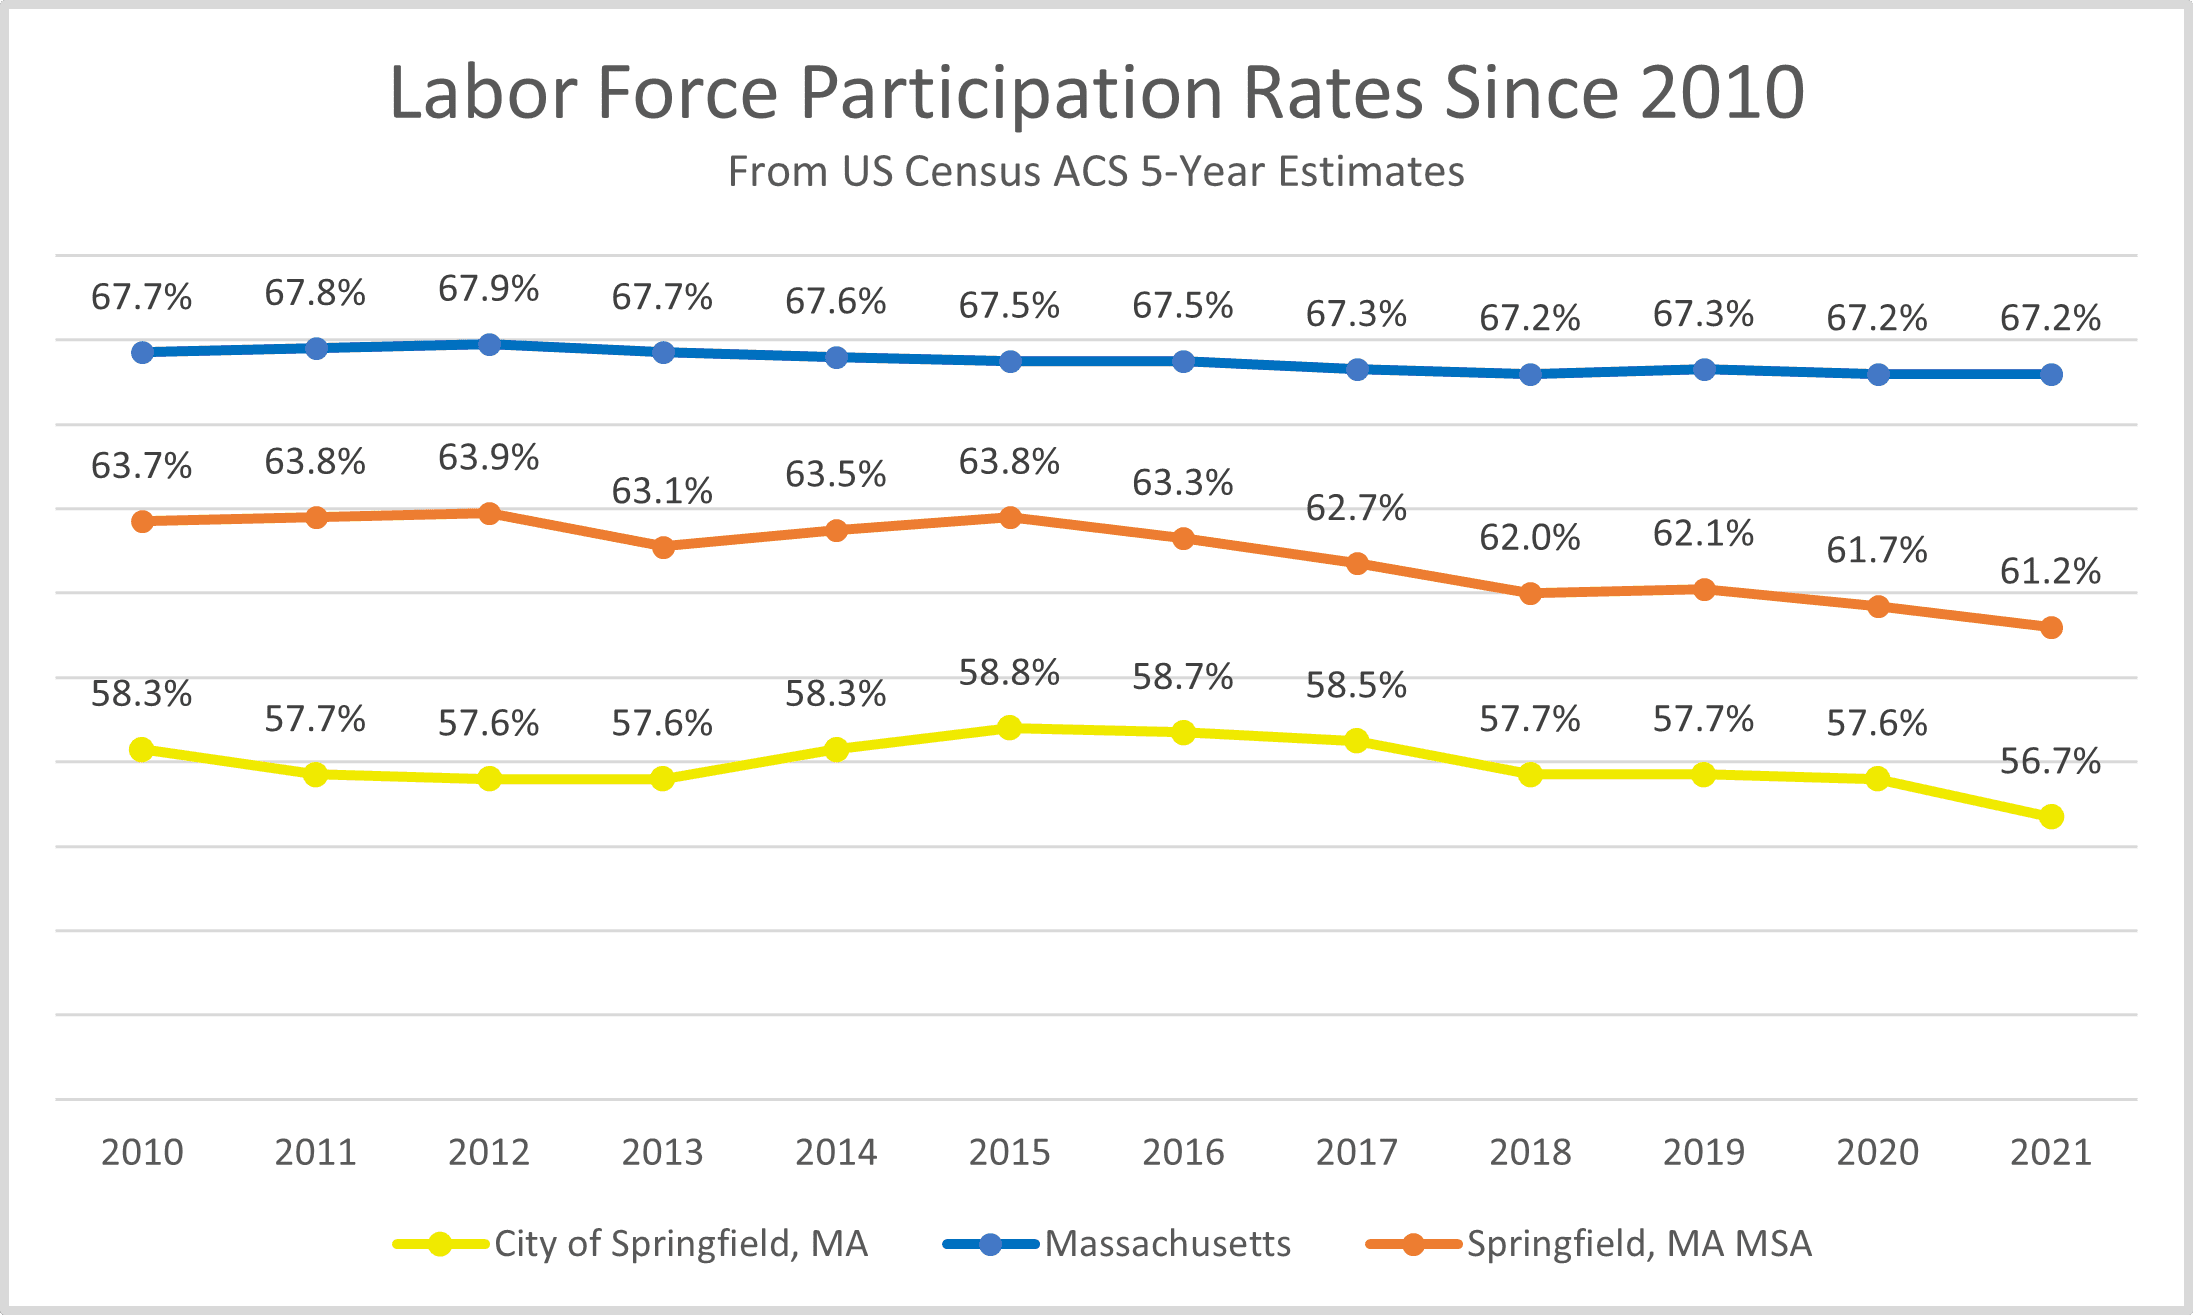 Labor force participation in Springfield. Source: US Census https://data.census.gov/table?q=dp03&g=160XX00US2567000_050XX00US25013_010XX00US_040XX00US25&tid=ACSDP5Y2020.DP03